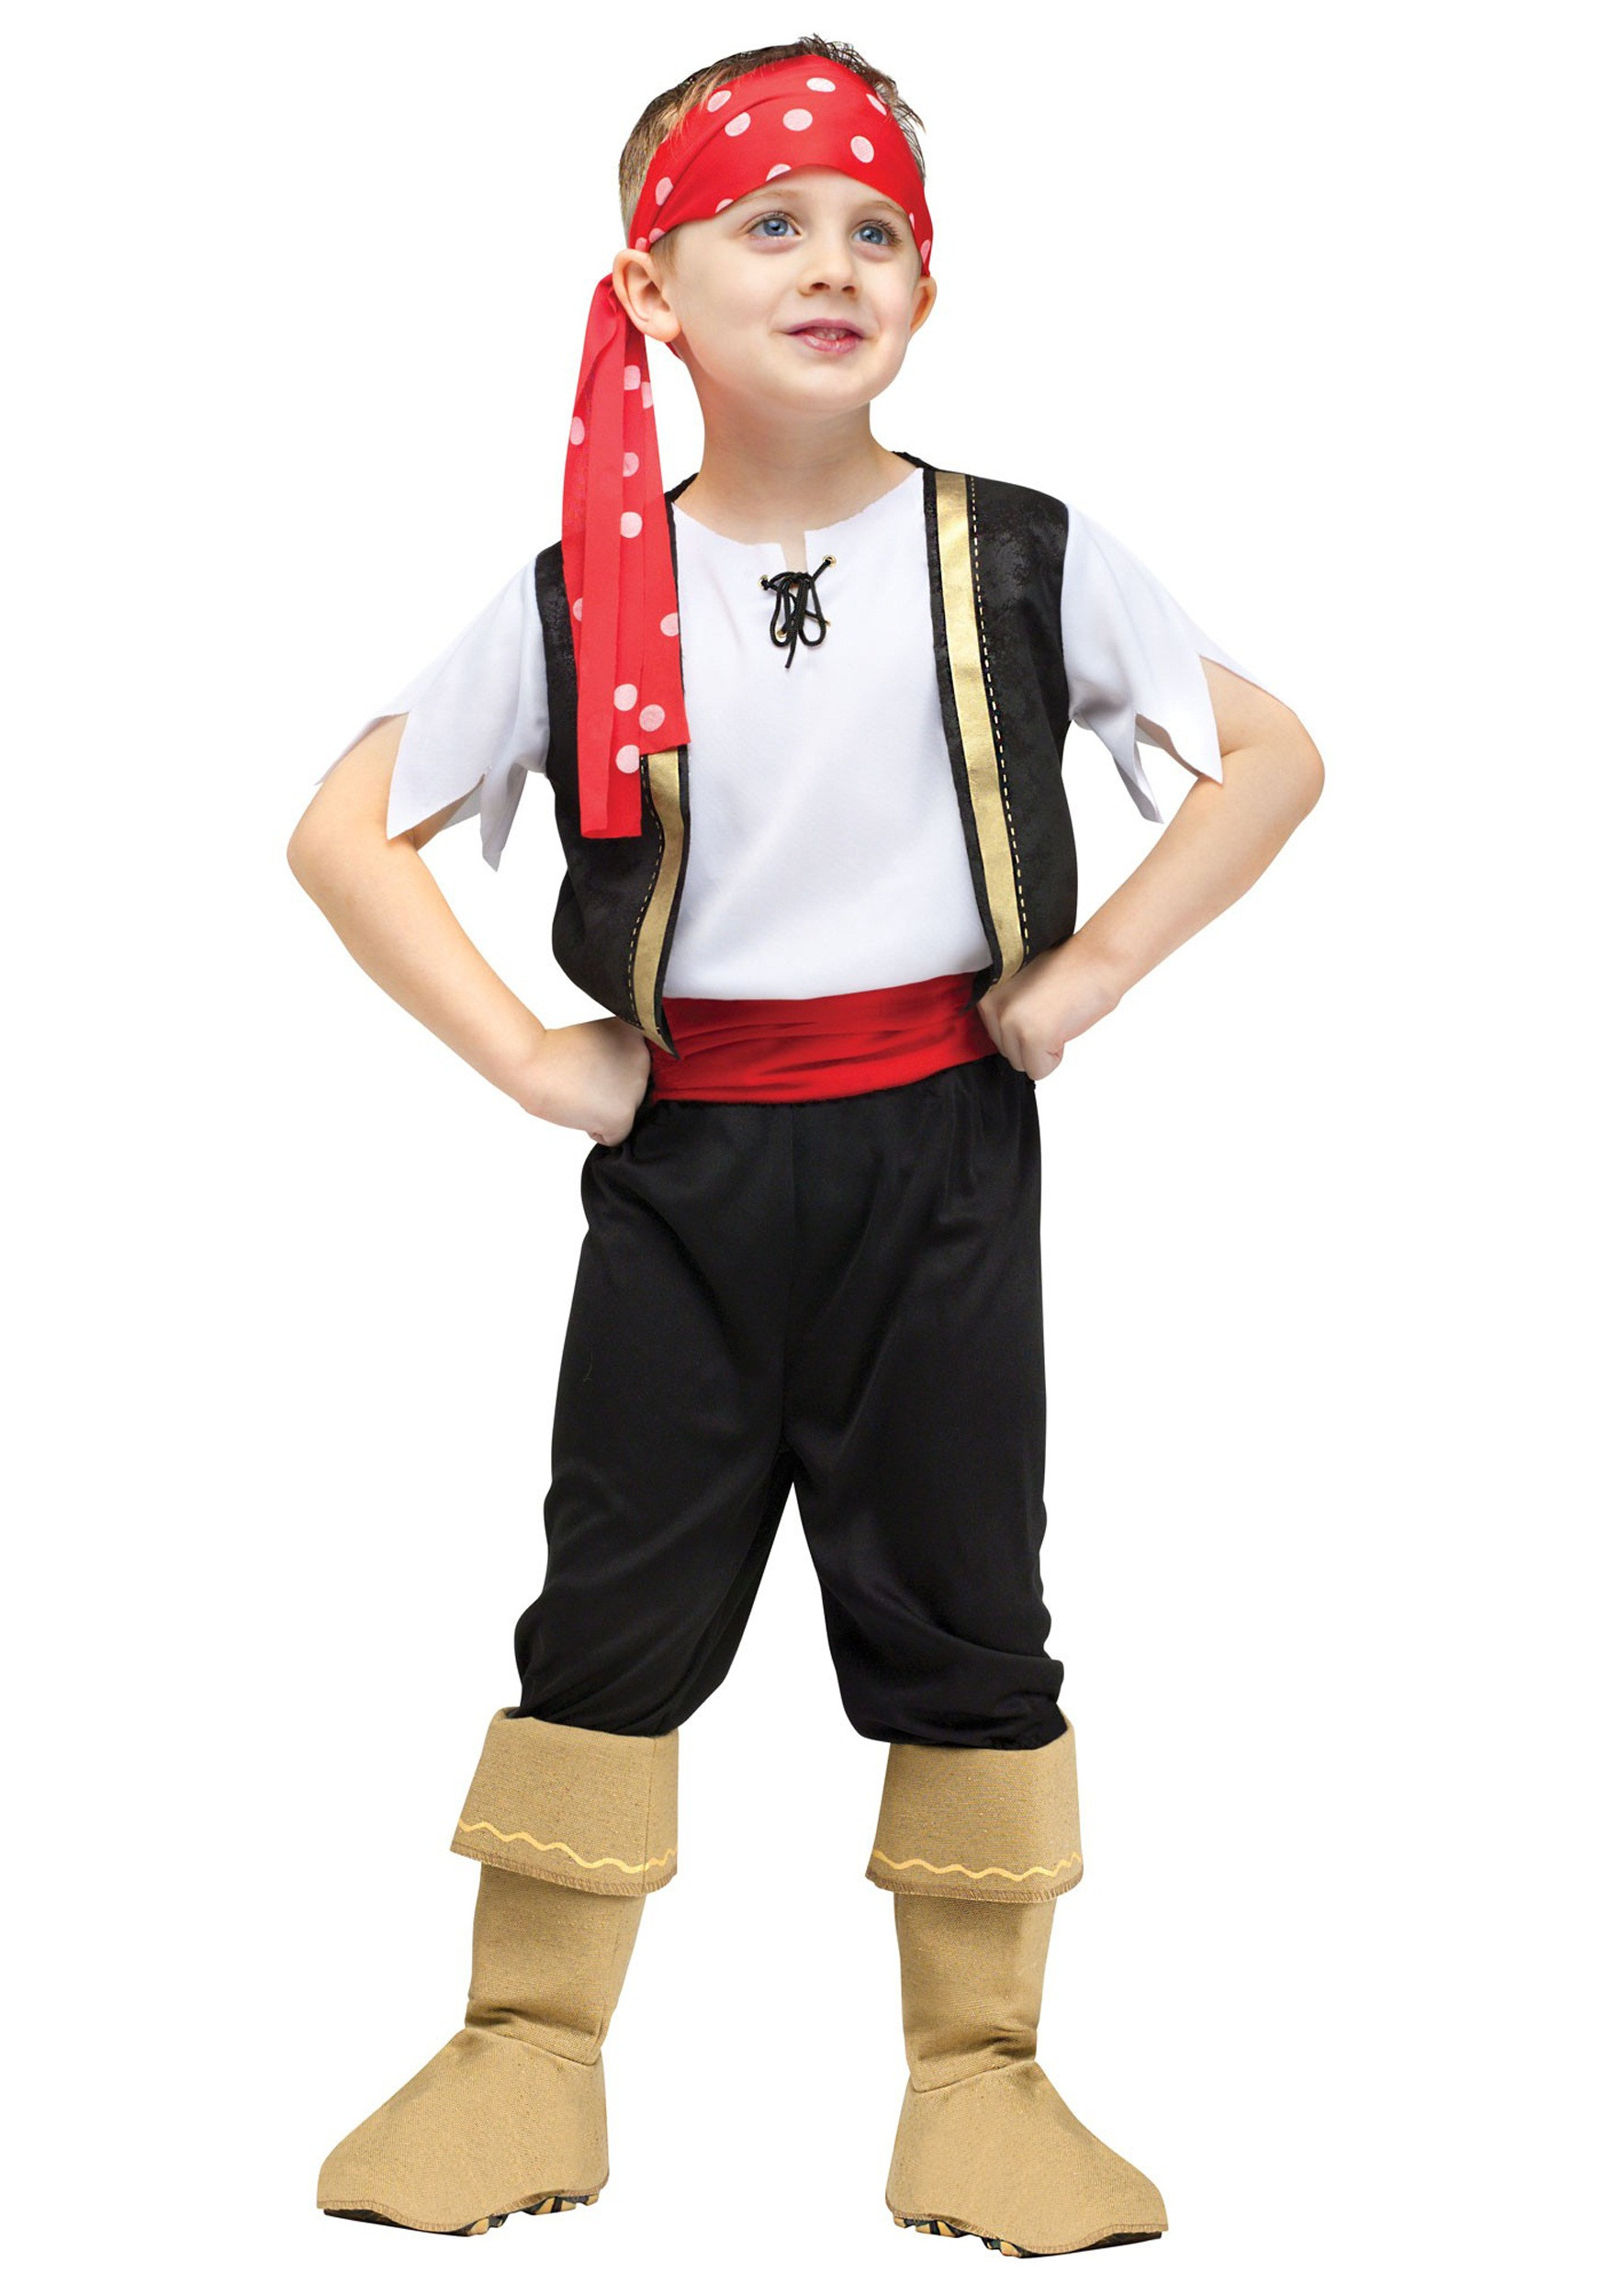 DIY Pirate Costumes For Kids
 Homemade Pirate Costume For Kids